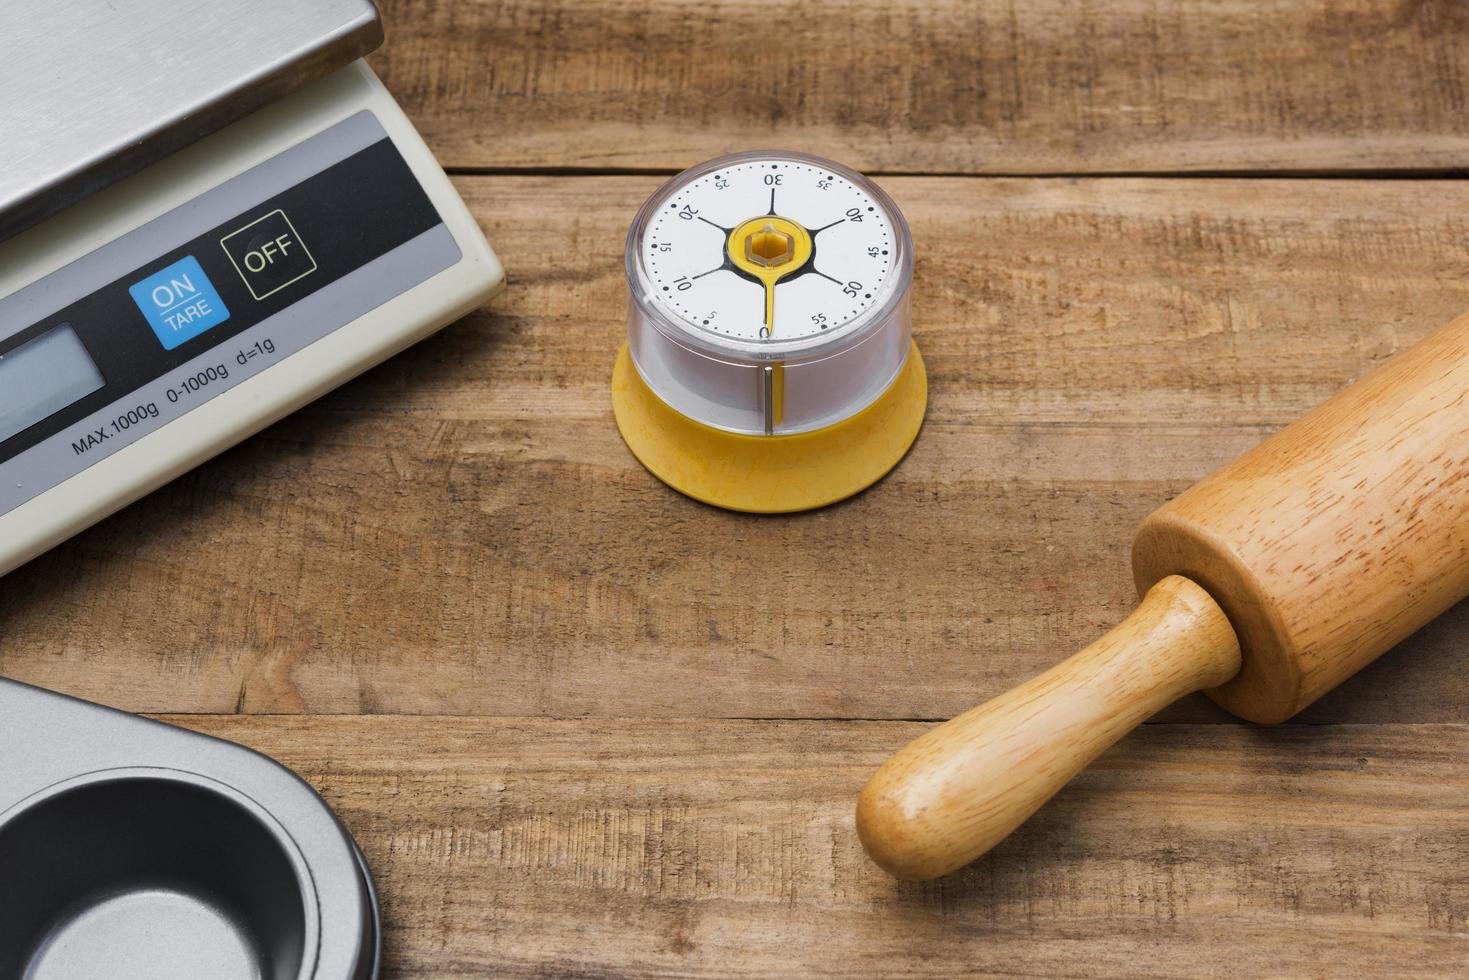 Bakery and cooking tools with a kitchen timer, scales, and kitchen mold on a wooden table photo